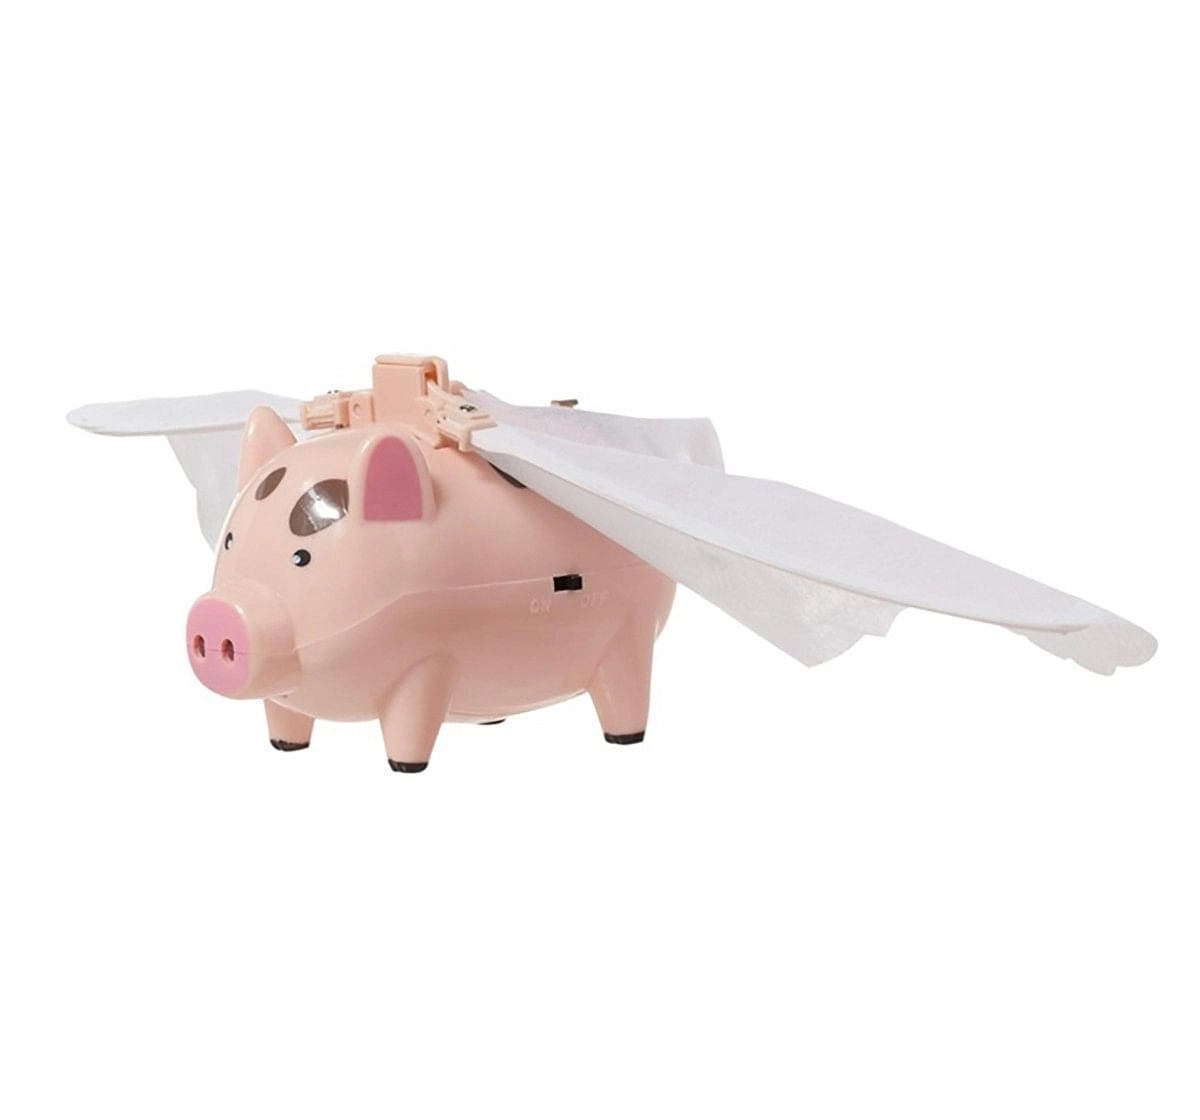 Hamleys Flying Pig Toy (Pink) Impulse Toys for Kids age 24M+ (Peach)